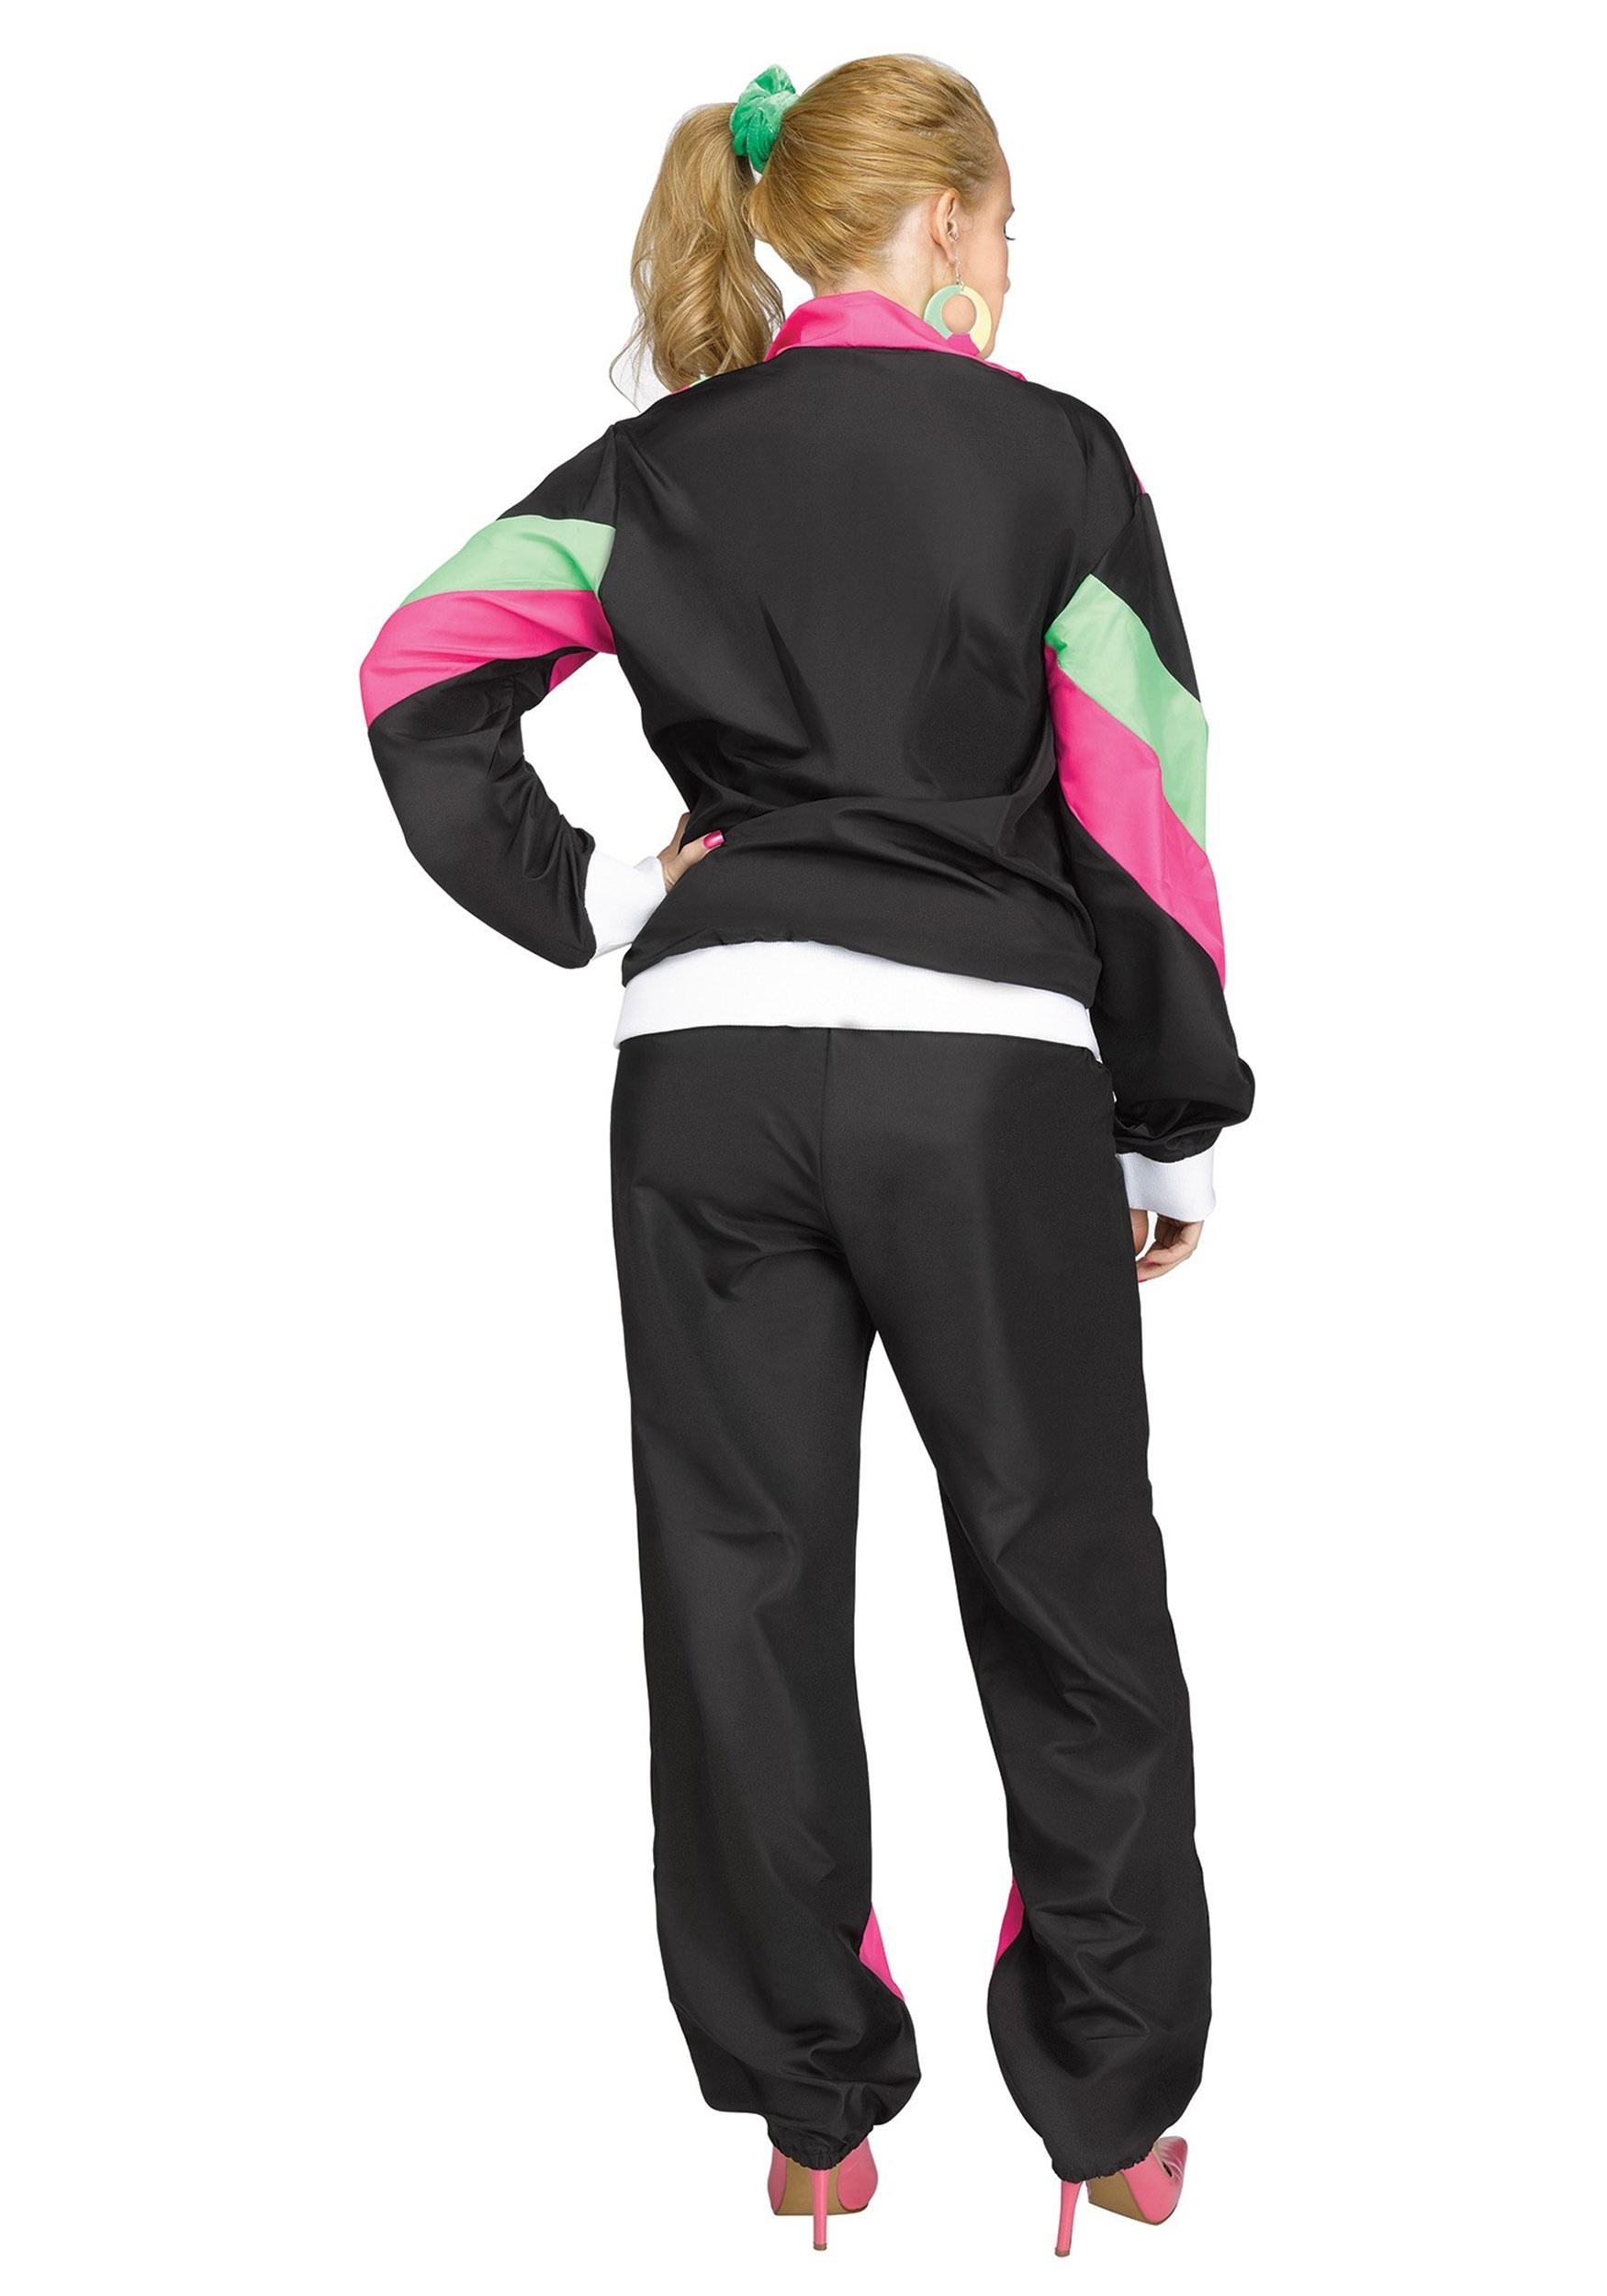 80's Track Suit Costume For Women